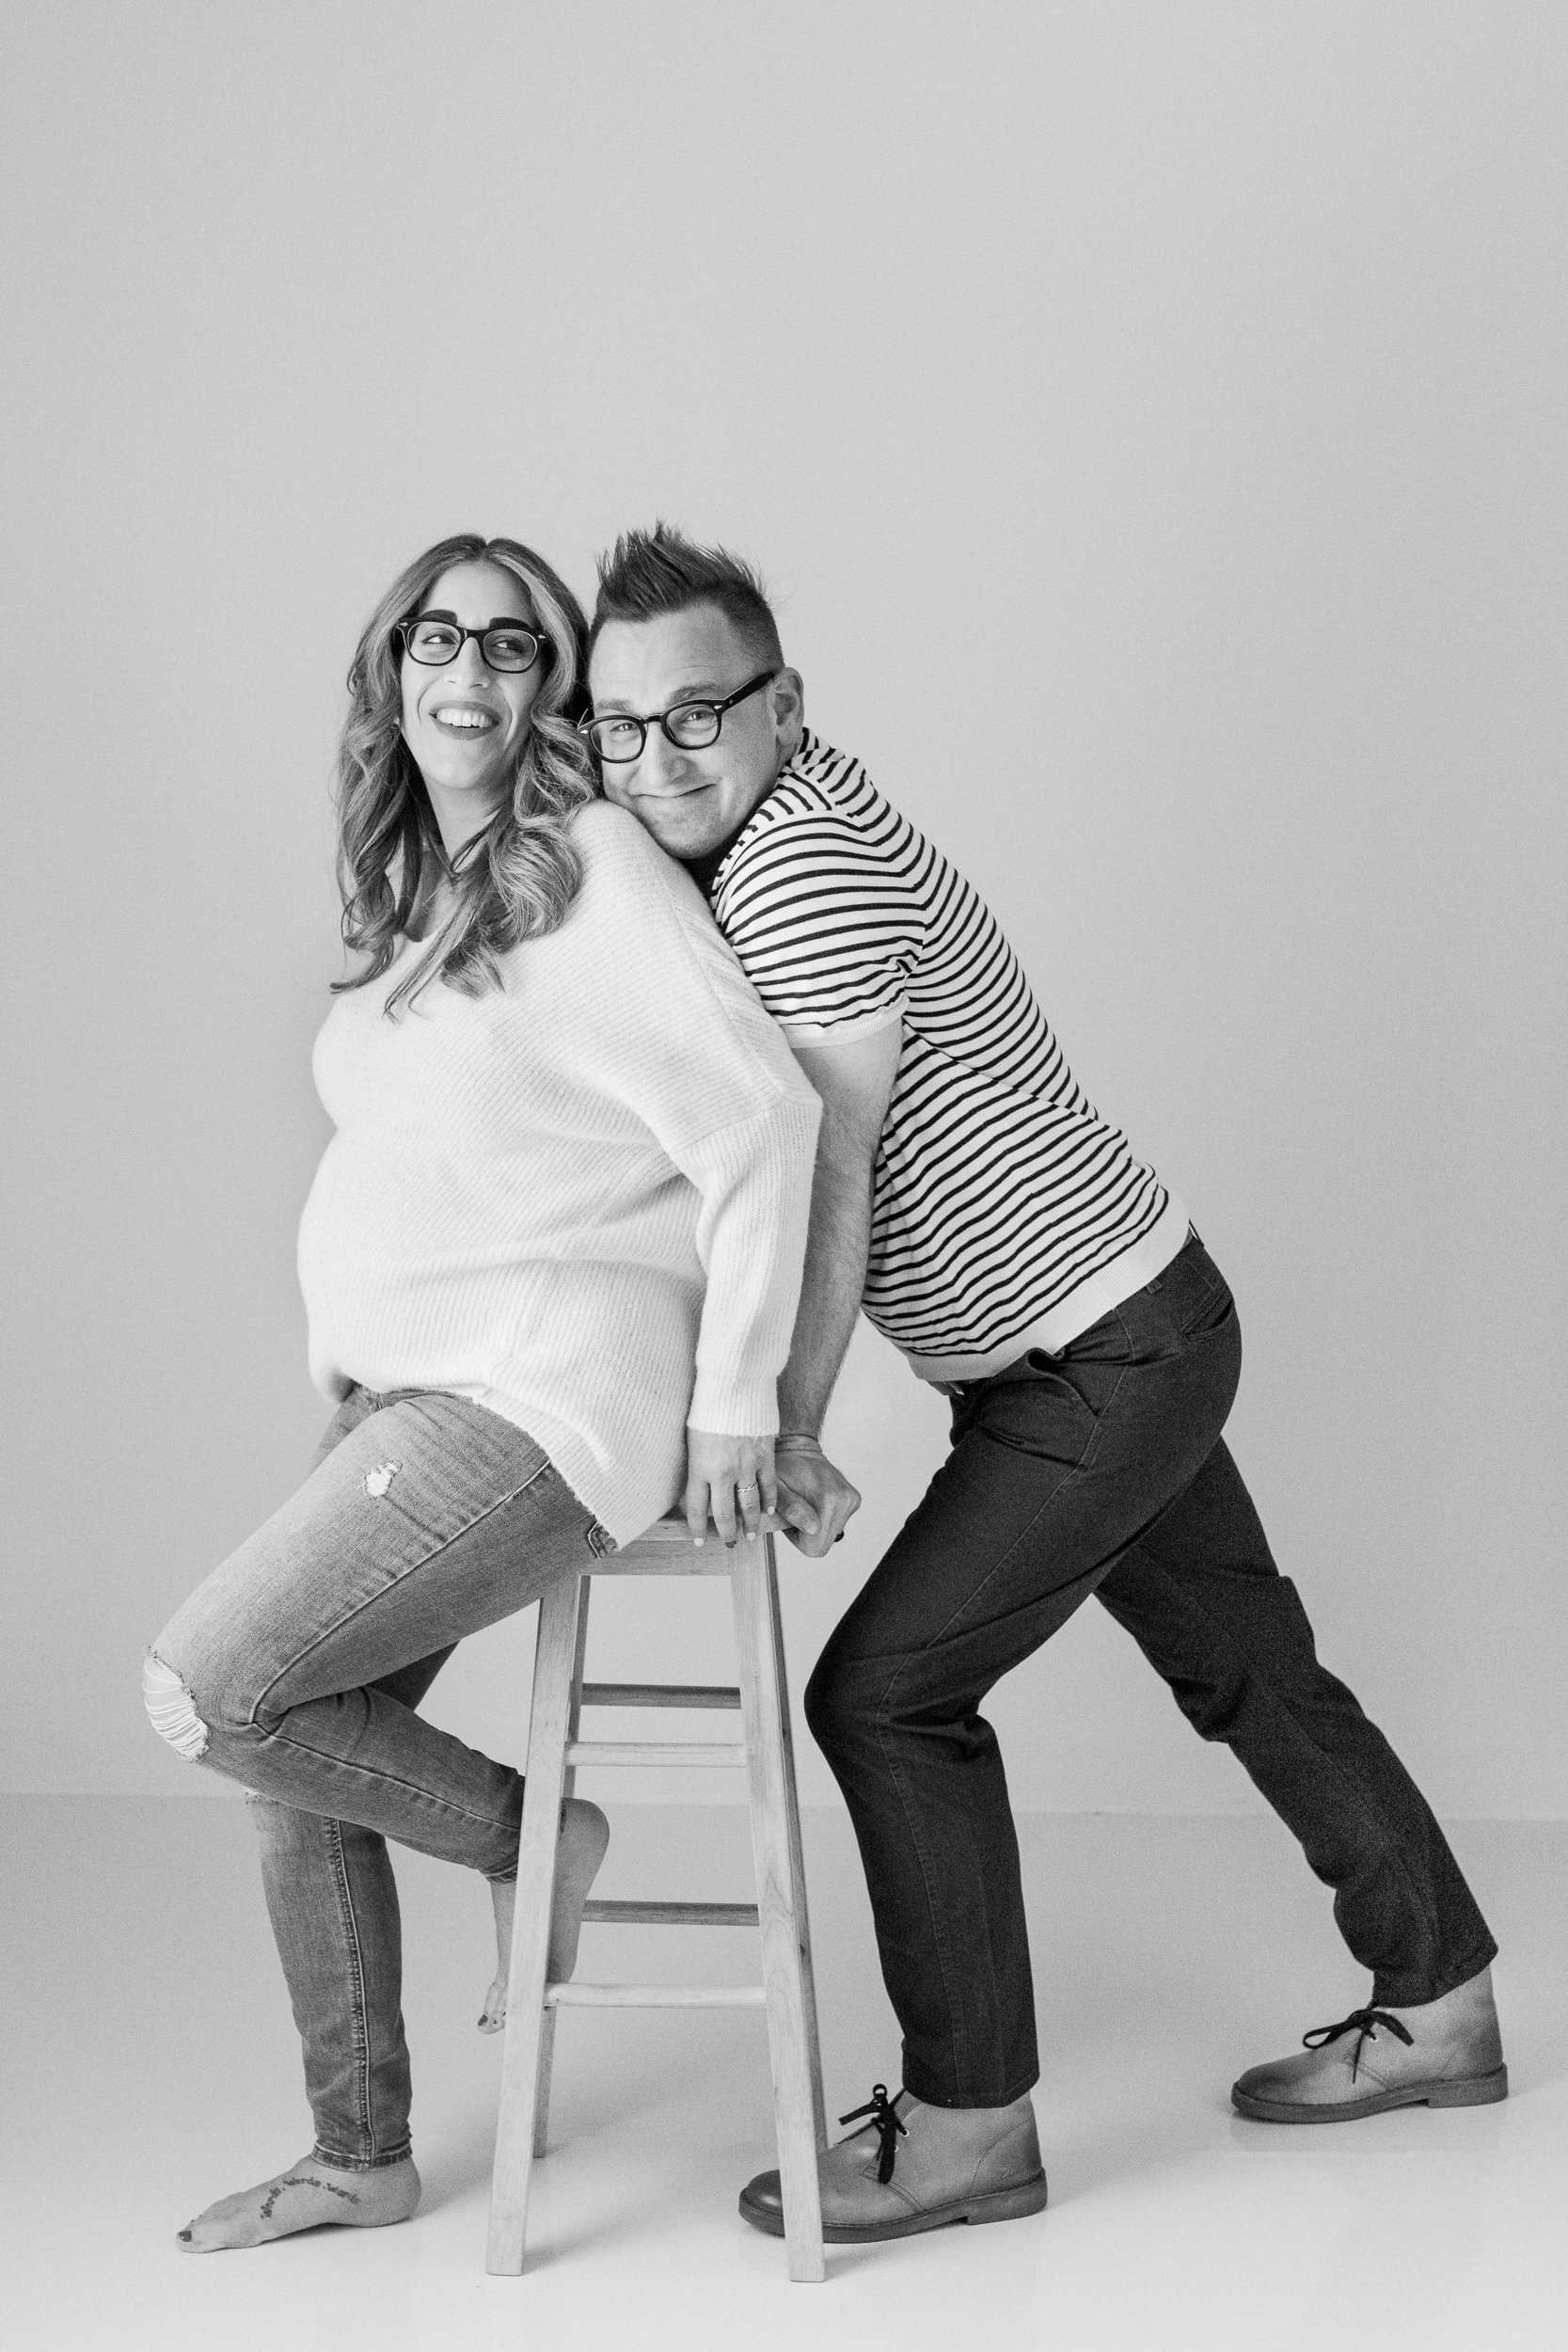  Glamorous maternity session at a studio in New Jersey by Nicole Hawkins Photography. minimalist hipster session simple maternity #NicoleHawkinsPhotography #maternitysession #NJmaternityphotographer #NewJerseyphotographers #maternityphotos 